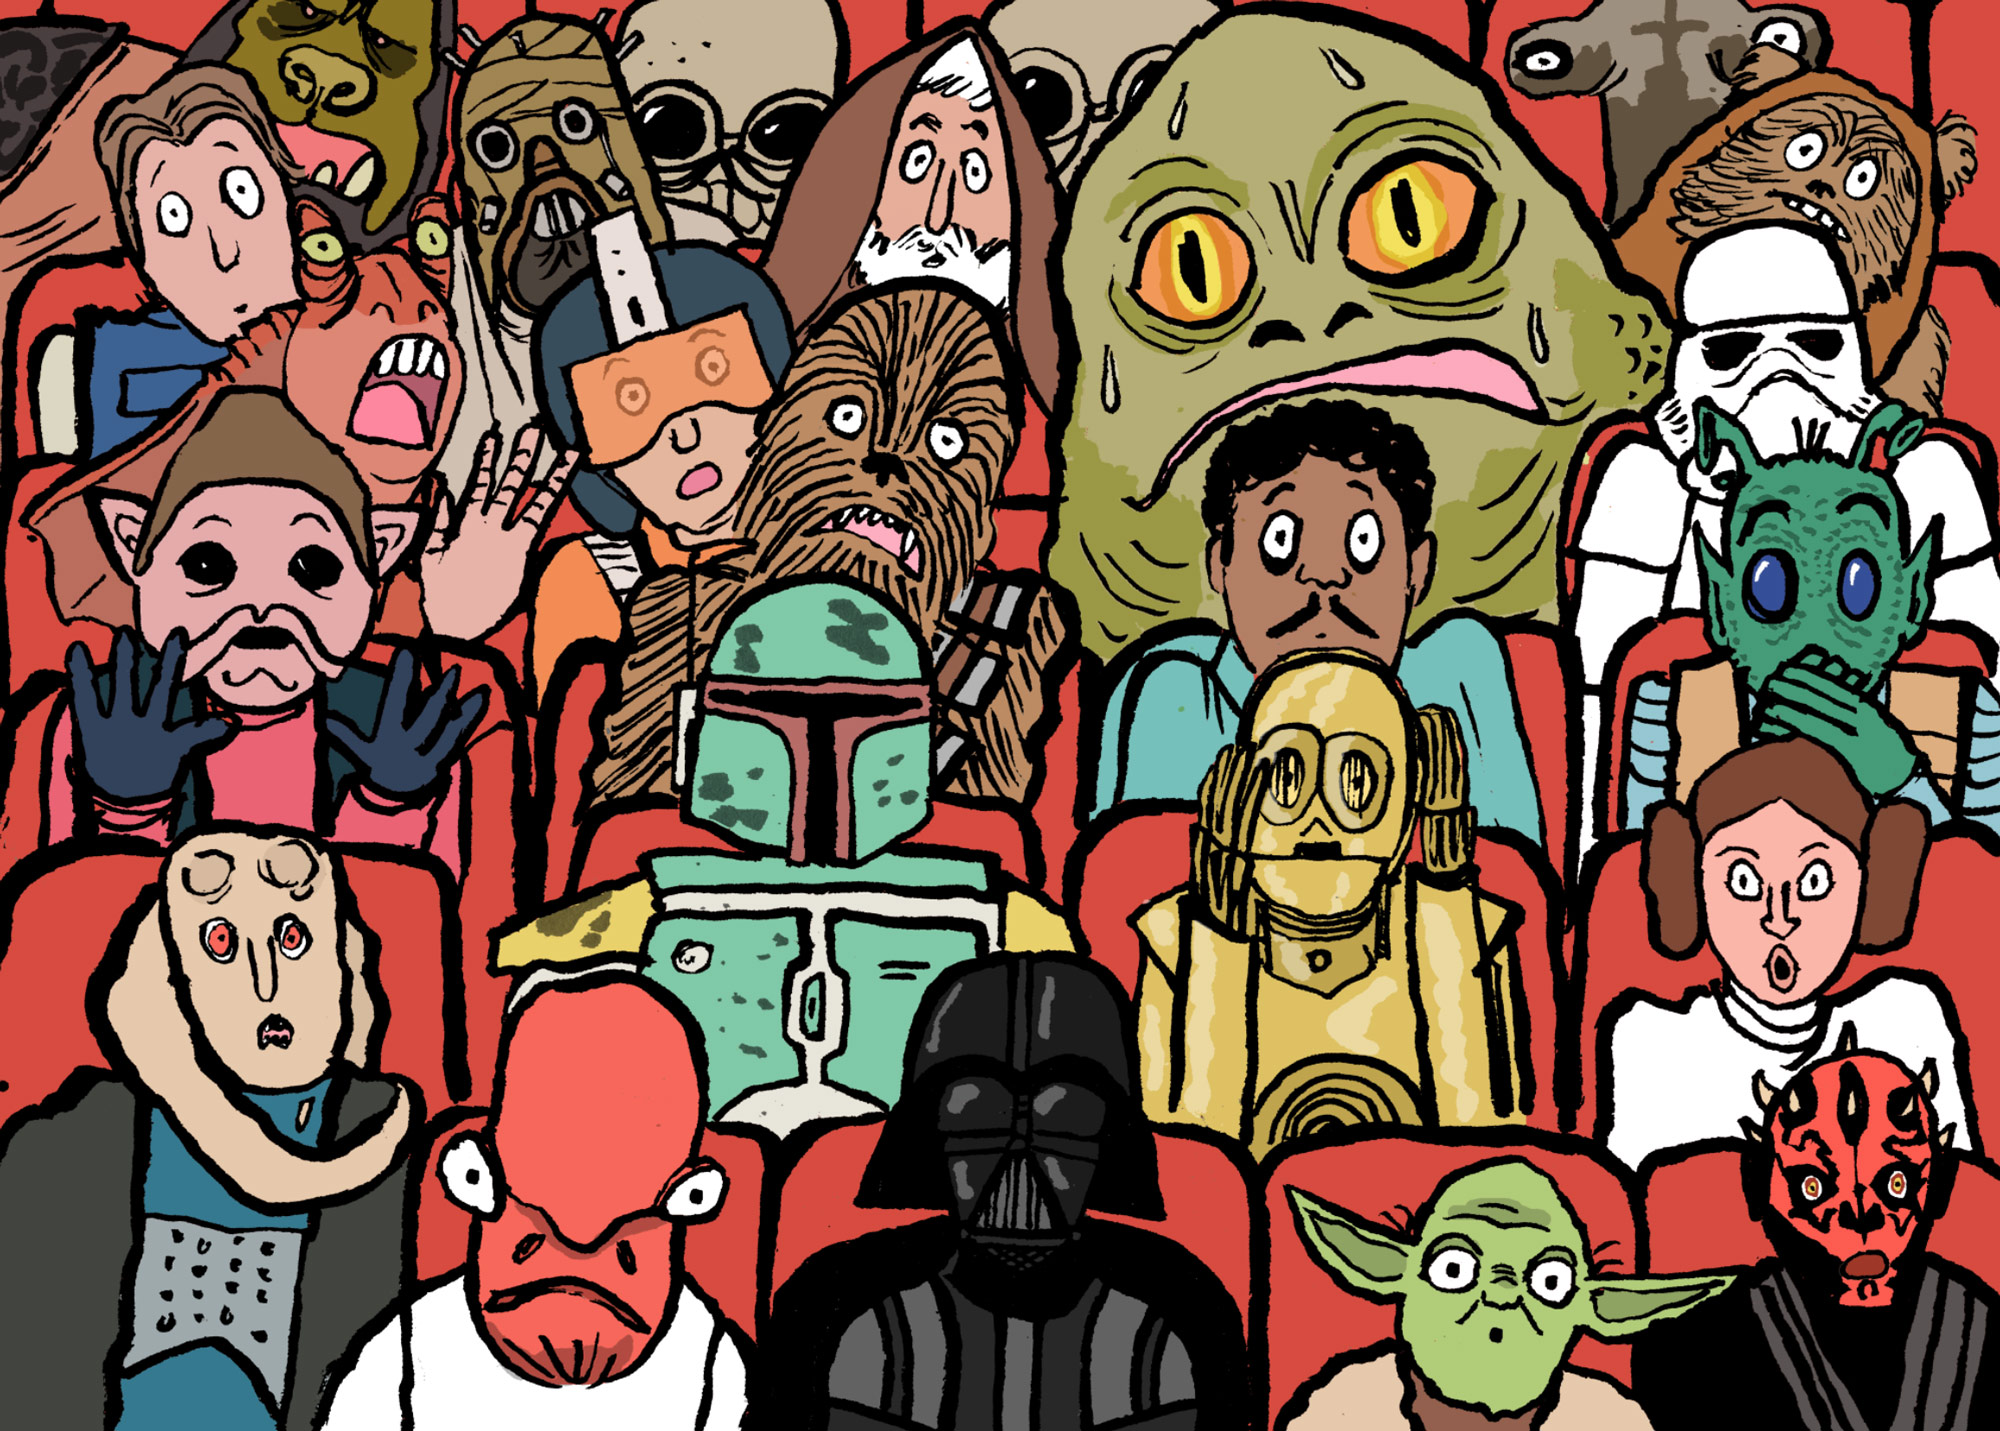 Making Way: A theatre full of Star Wars characters